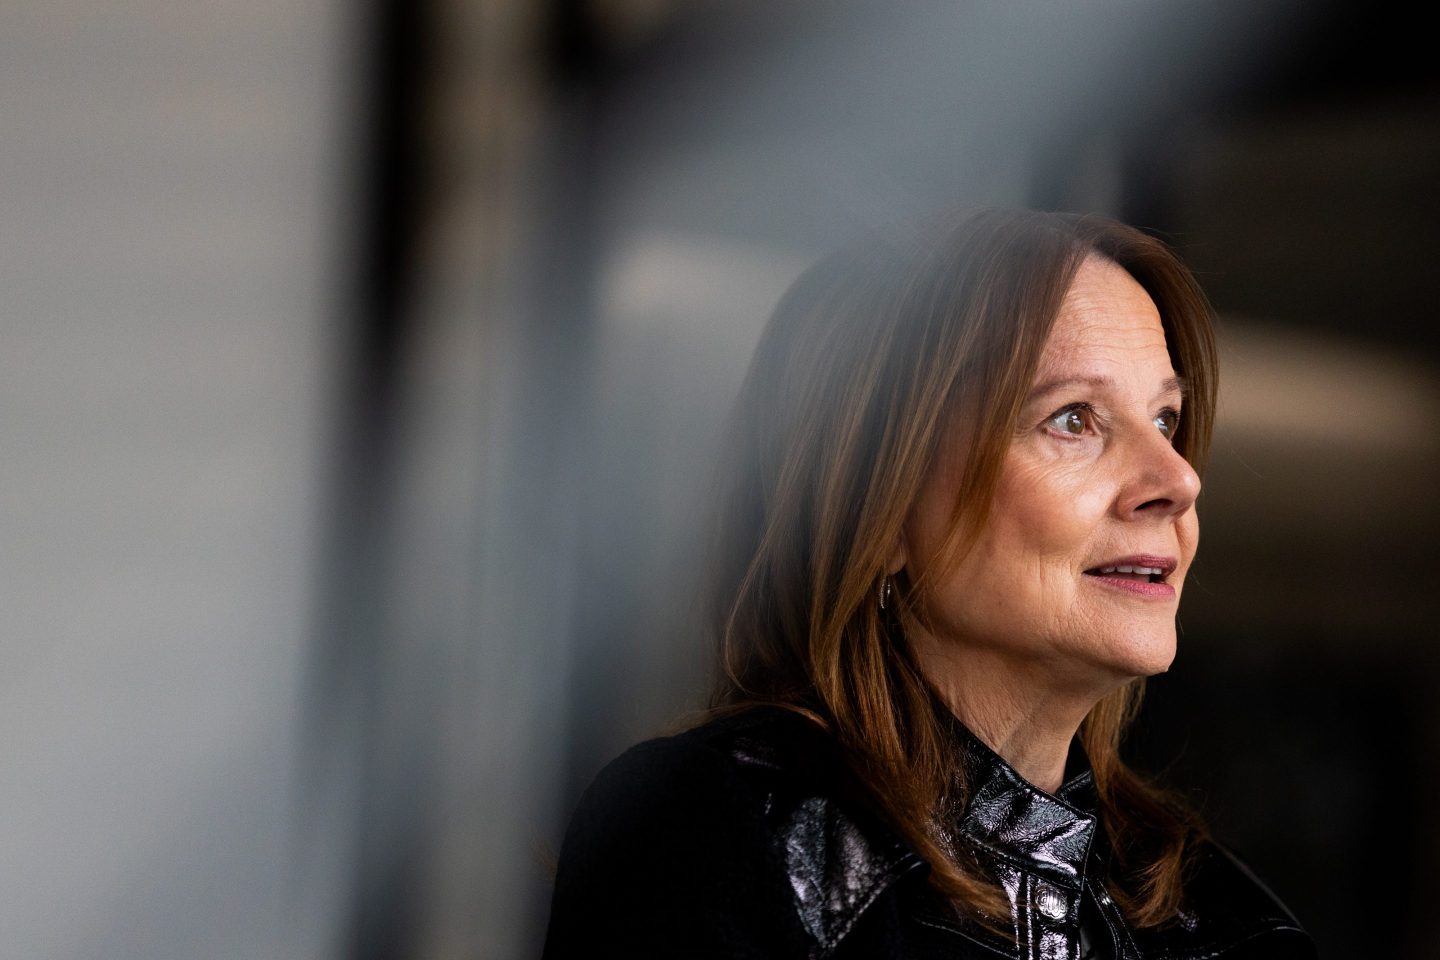 GM CEO Mary Barra is trying to help autonomous vehicle company Cruise recover from a serious safety incident last year after GM invested $10 billion in the company.